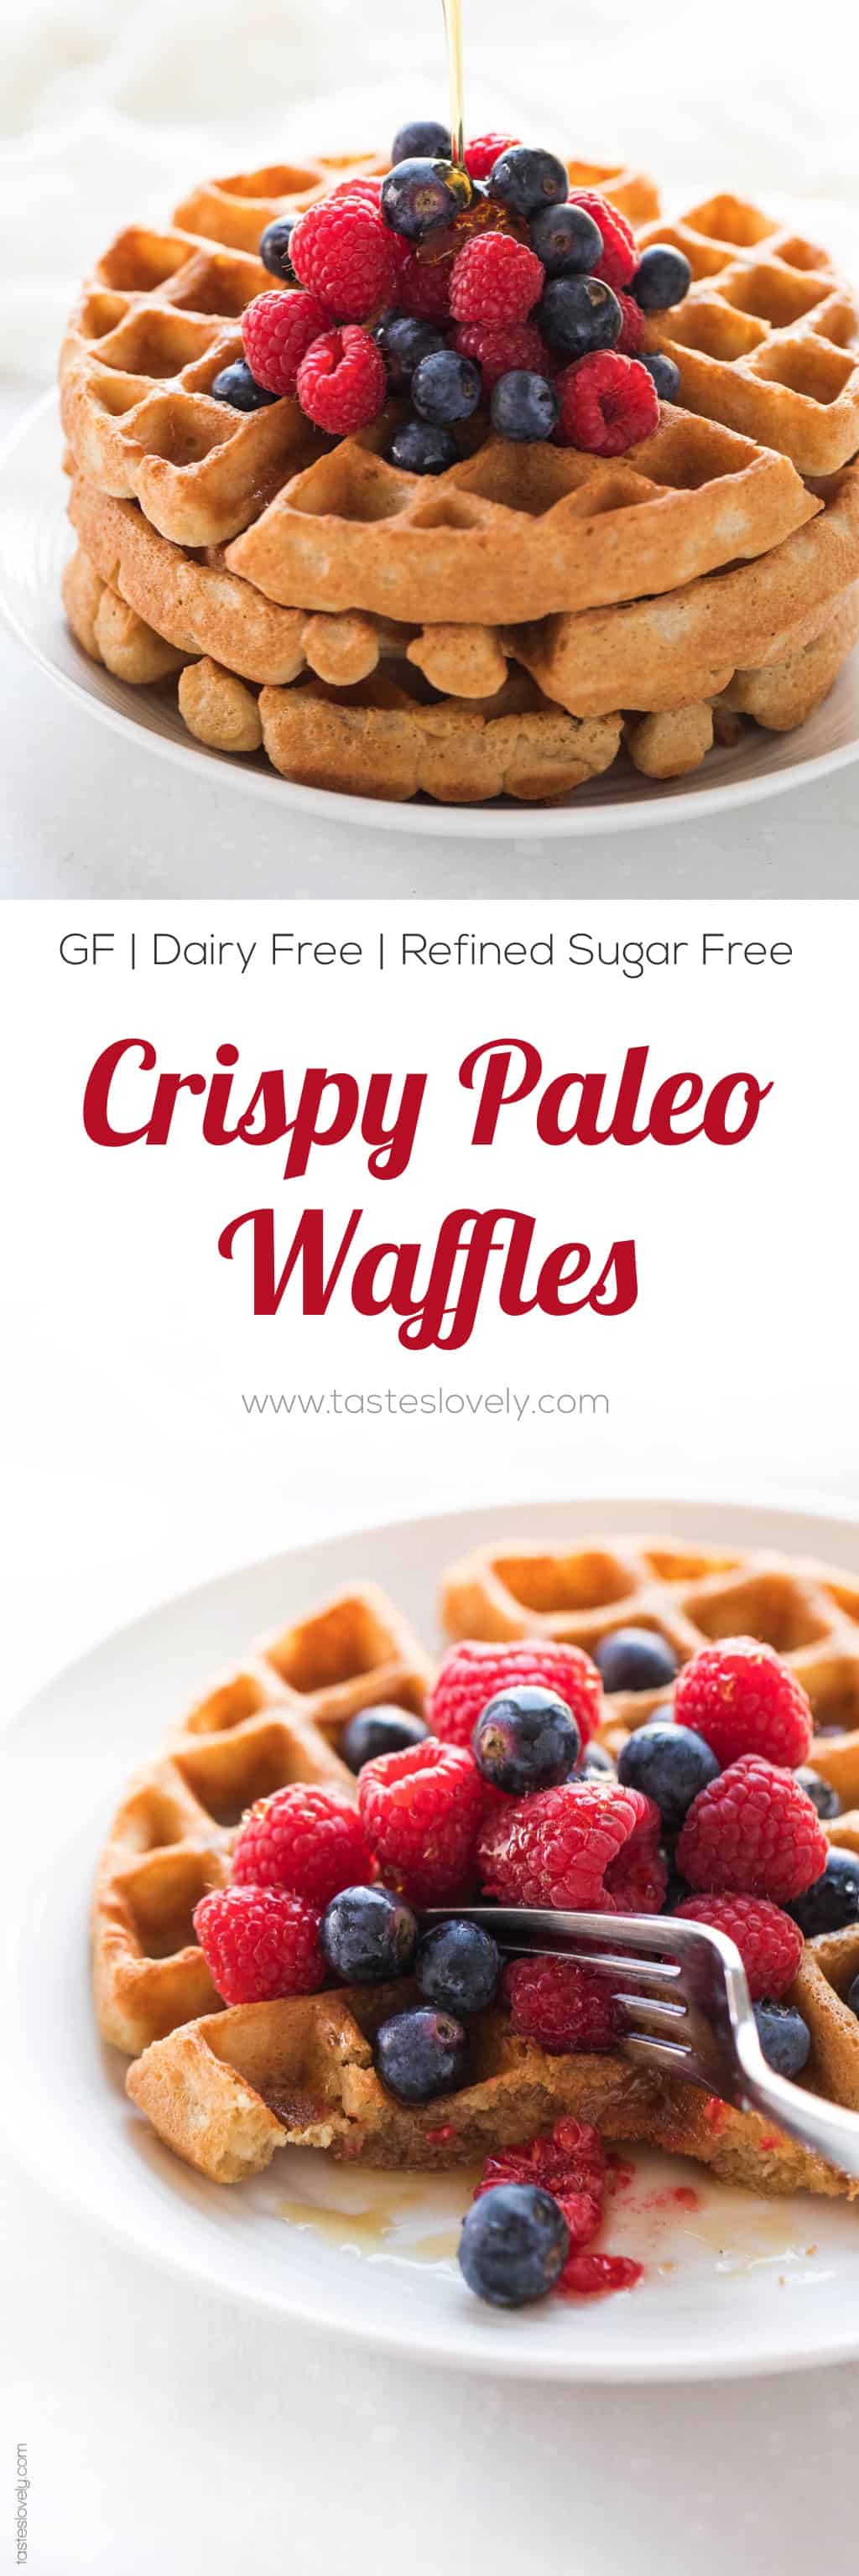 Crispy Paleo Waffles - the most delicious and crispy waffle recipe ever! You'd never guess these were paleo, gluten free, dairy free and refined sugar free!